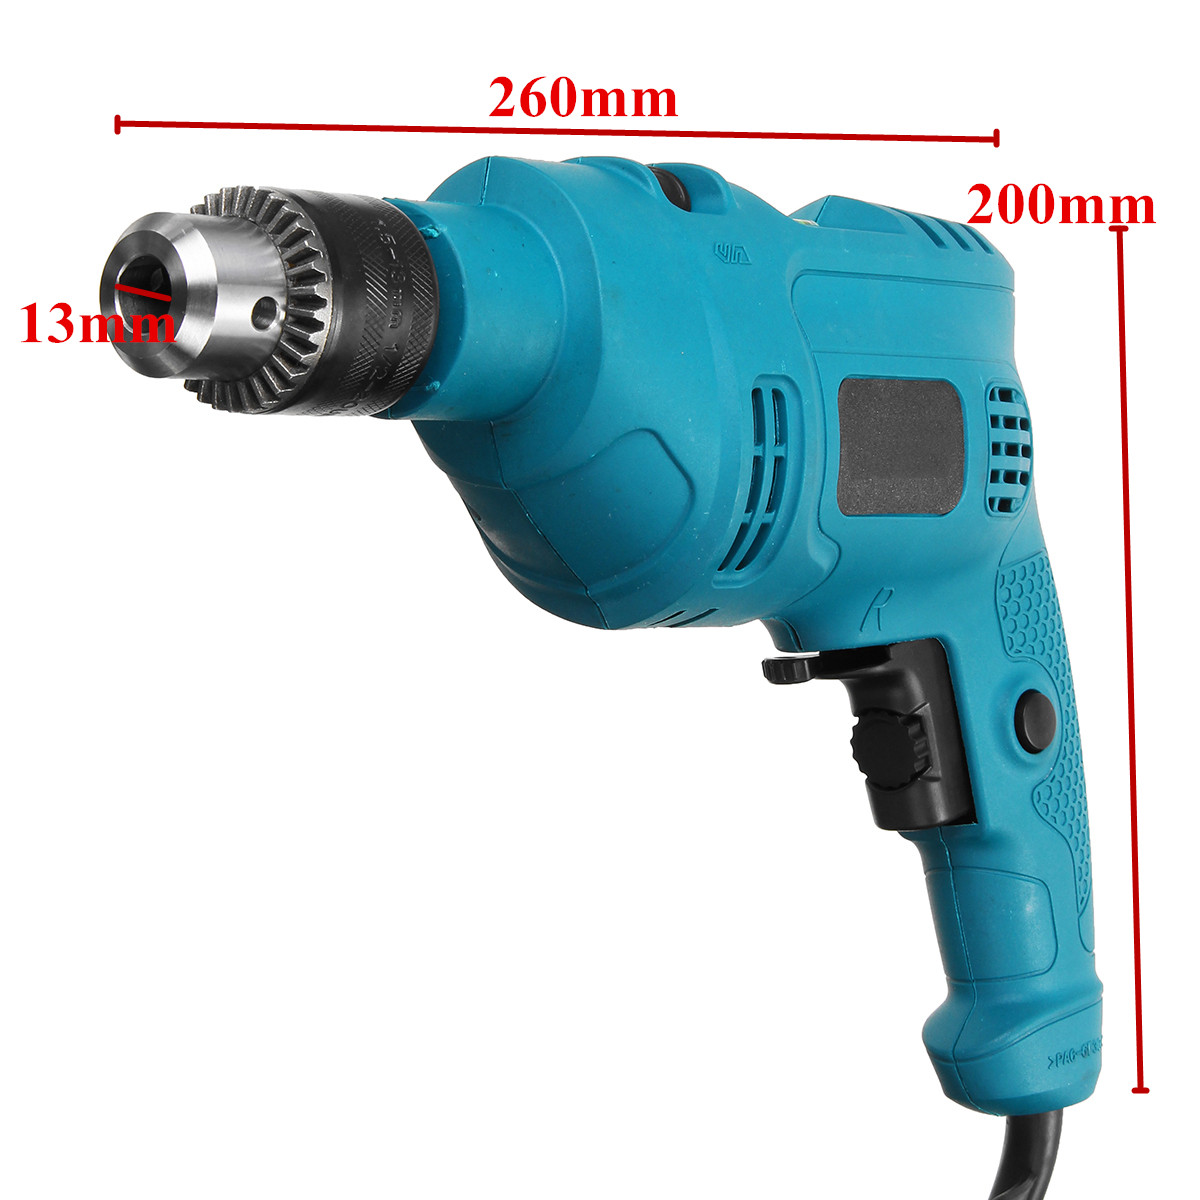 220V-3000RPM-650W-Electric-Impact-Cordless-Wrench-Drill-Hammer-Screwdriver-SET-1555908-9